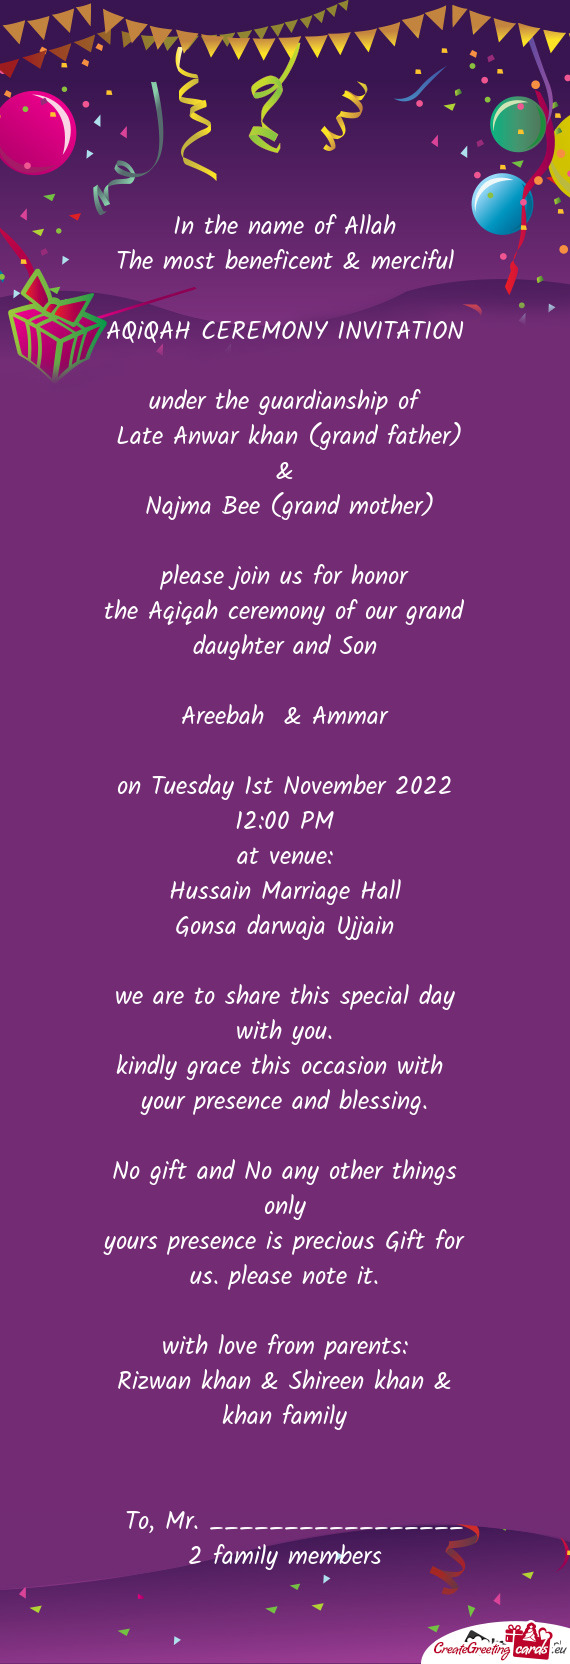 The Aqiqah ceremony of our grand daughter and Son